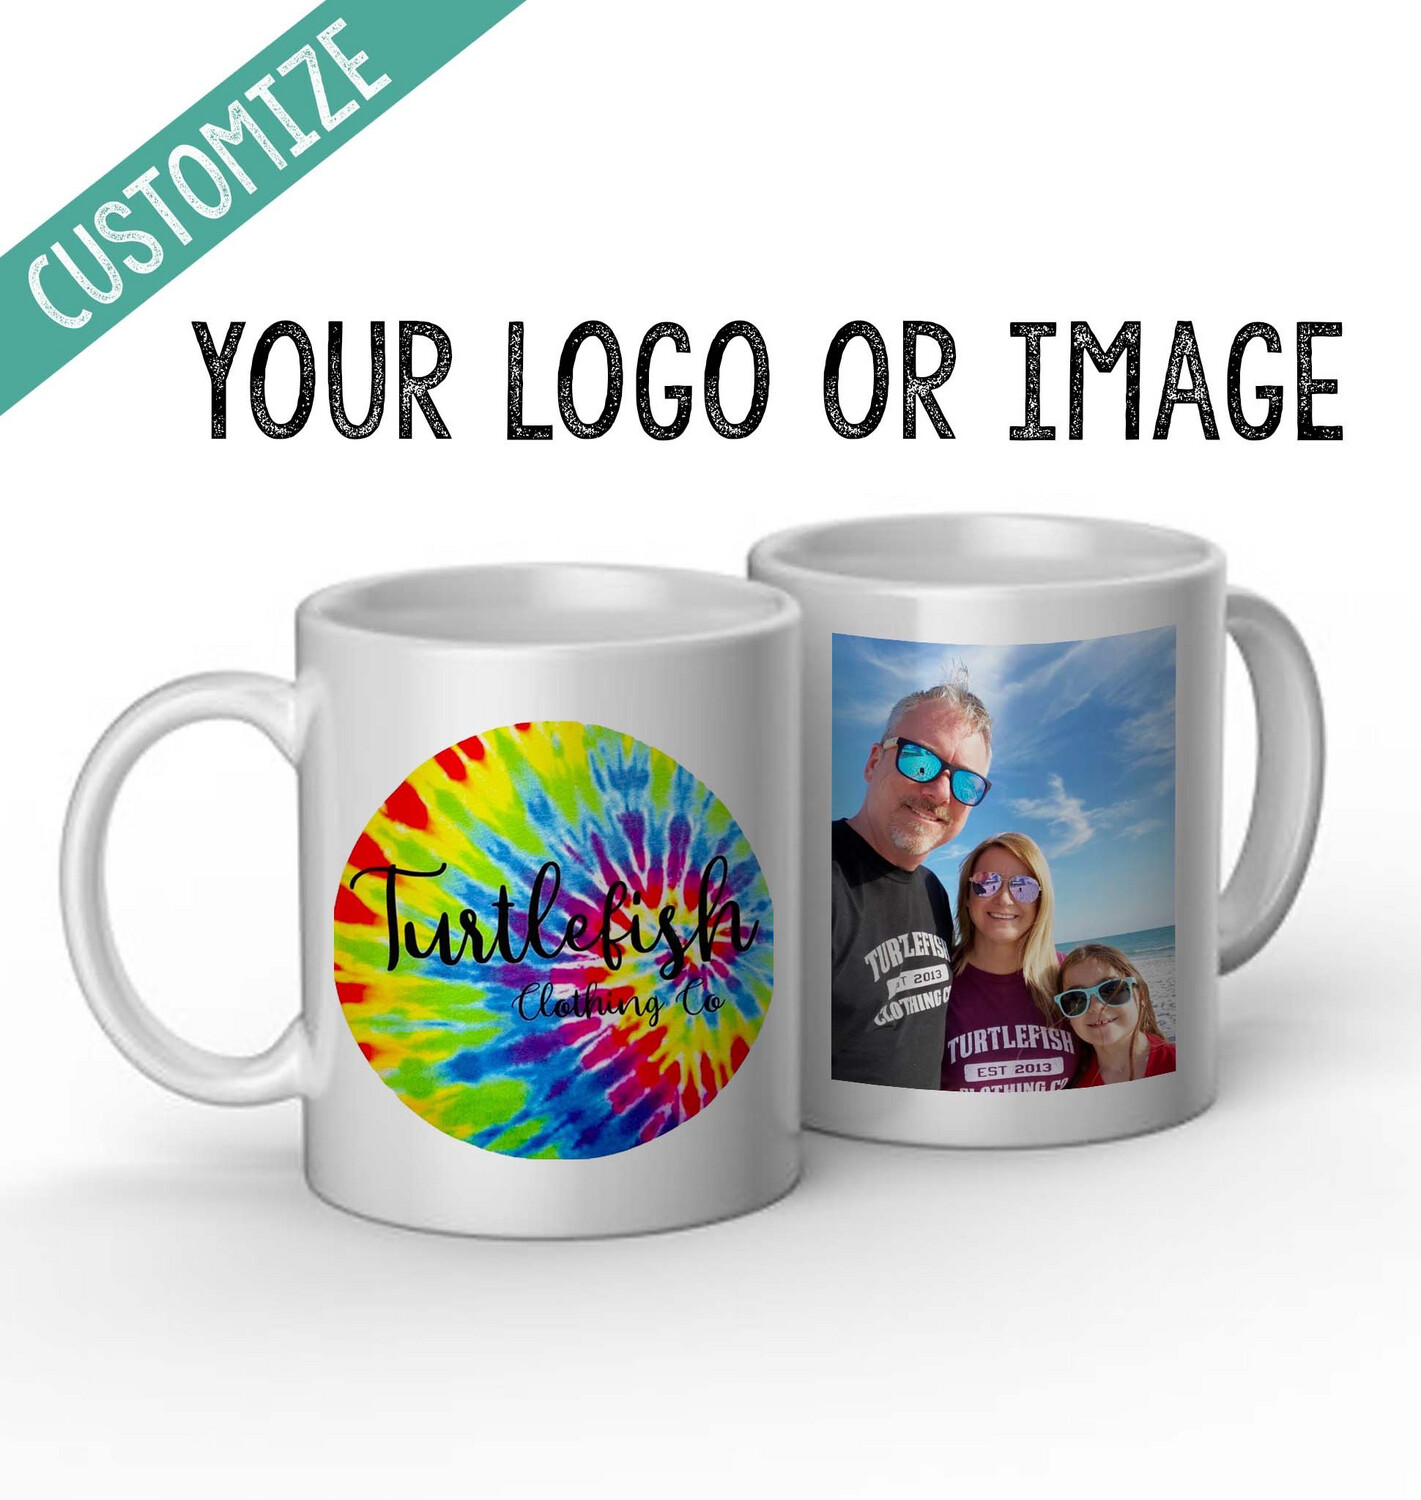 Promotional Mugs And Tumblers